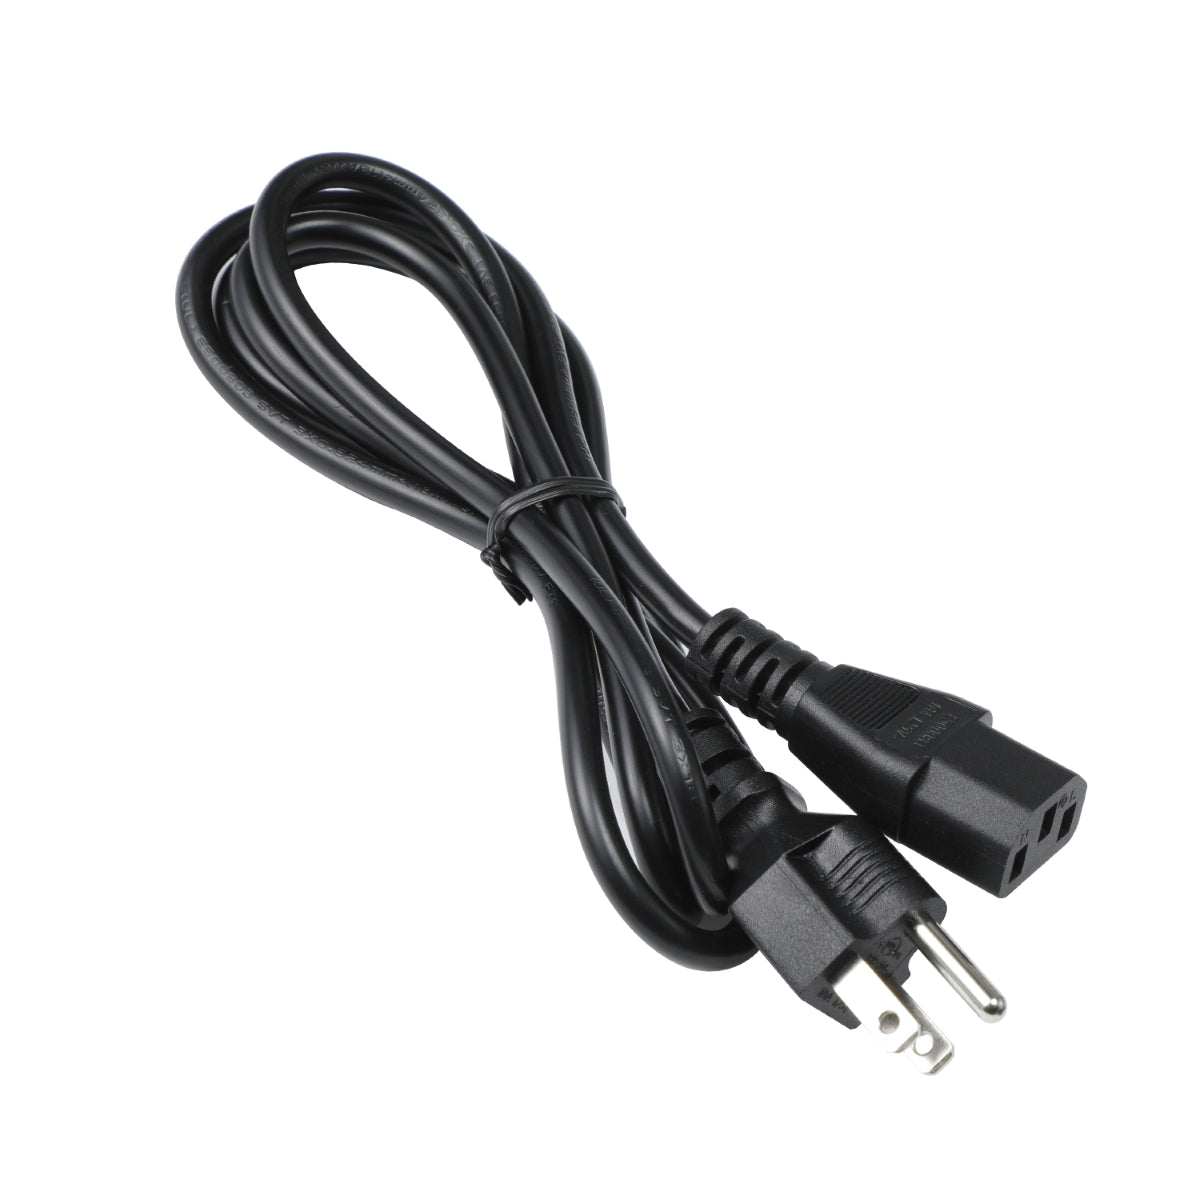 Power Cord for HP Pavilion 550-130z Computer.